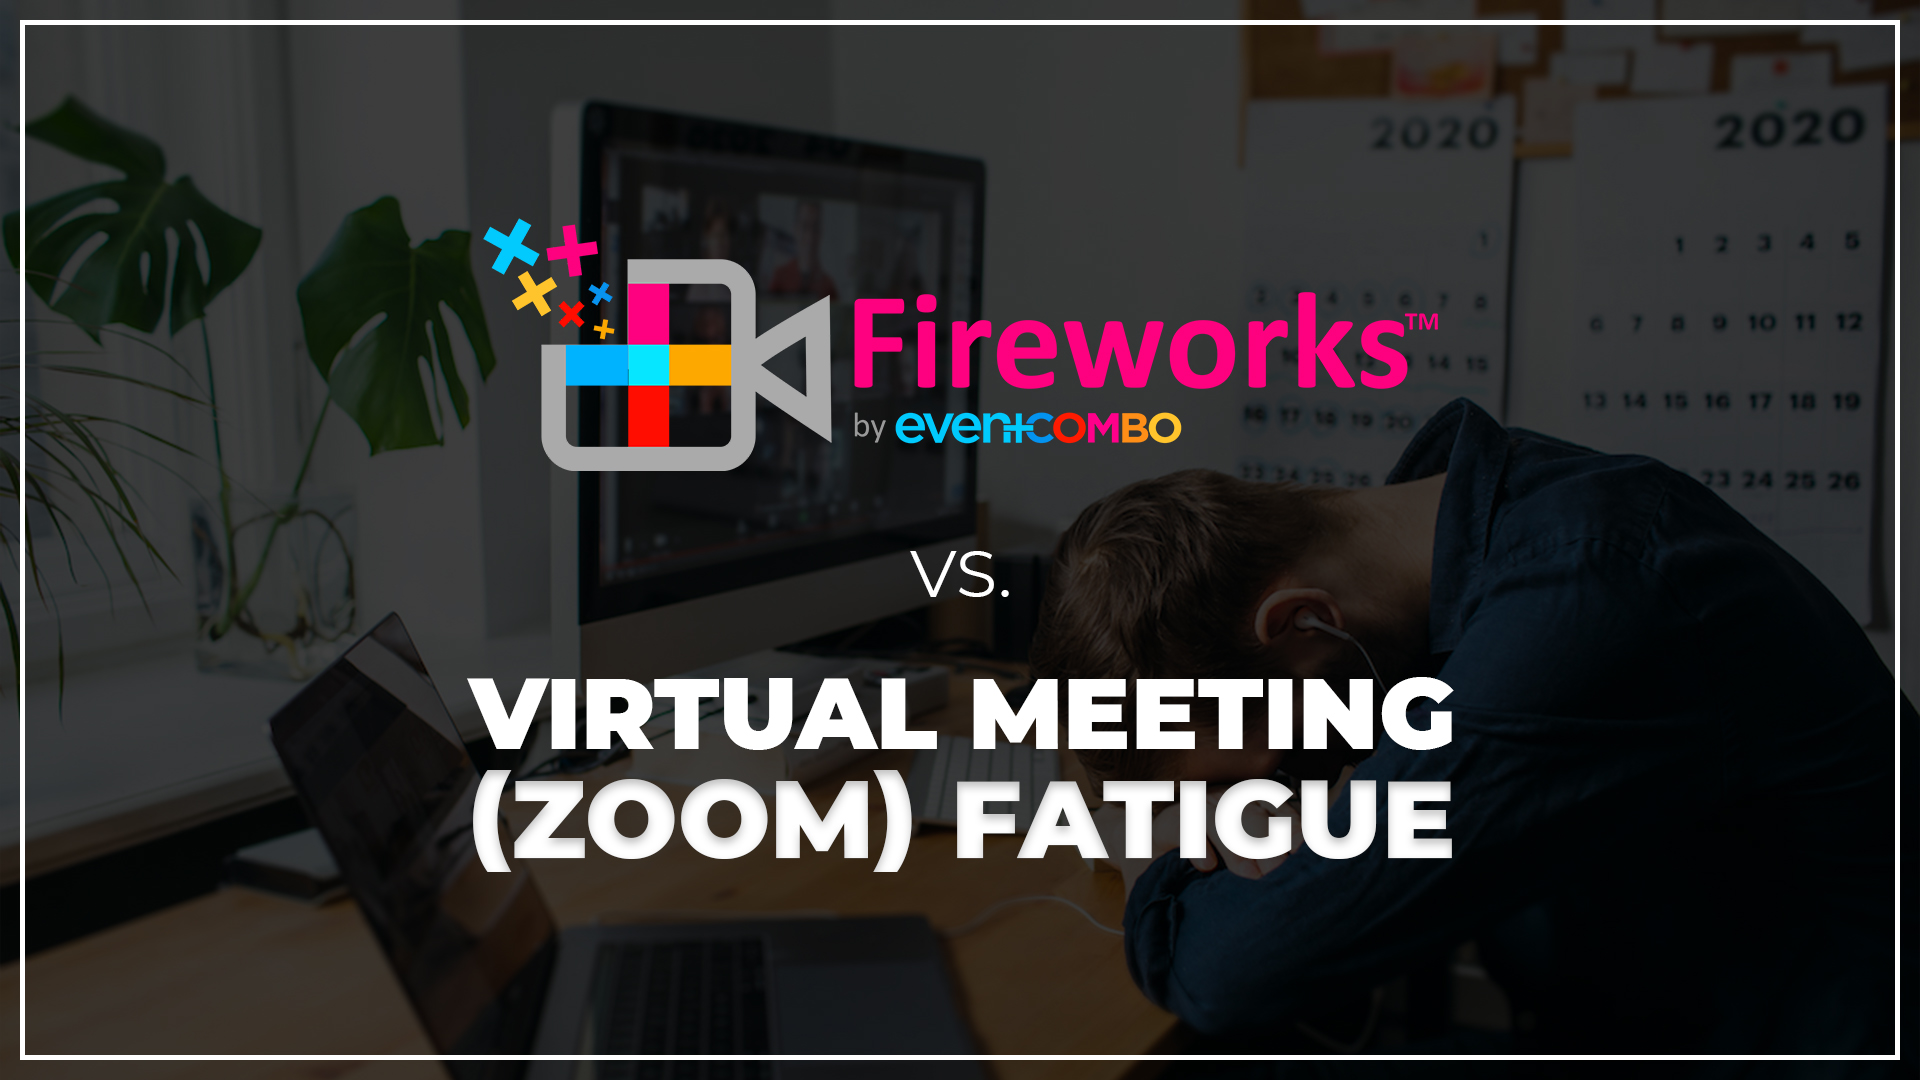 Virtual Meeting (Zoom) Fatigue: “How Fireworks™ by Eventcombo Can Help”